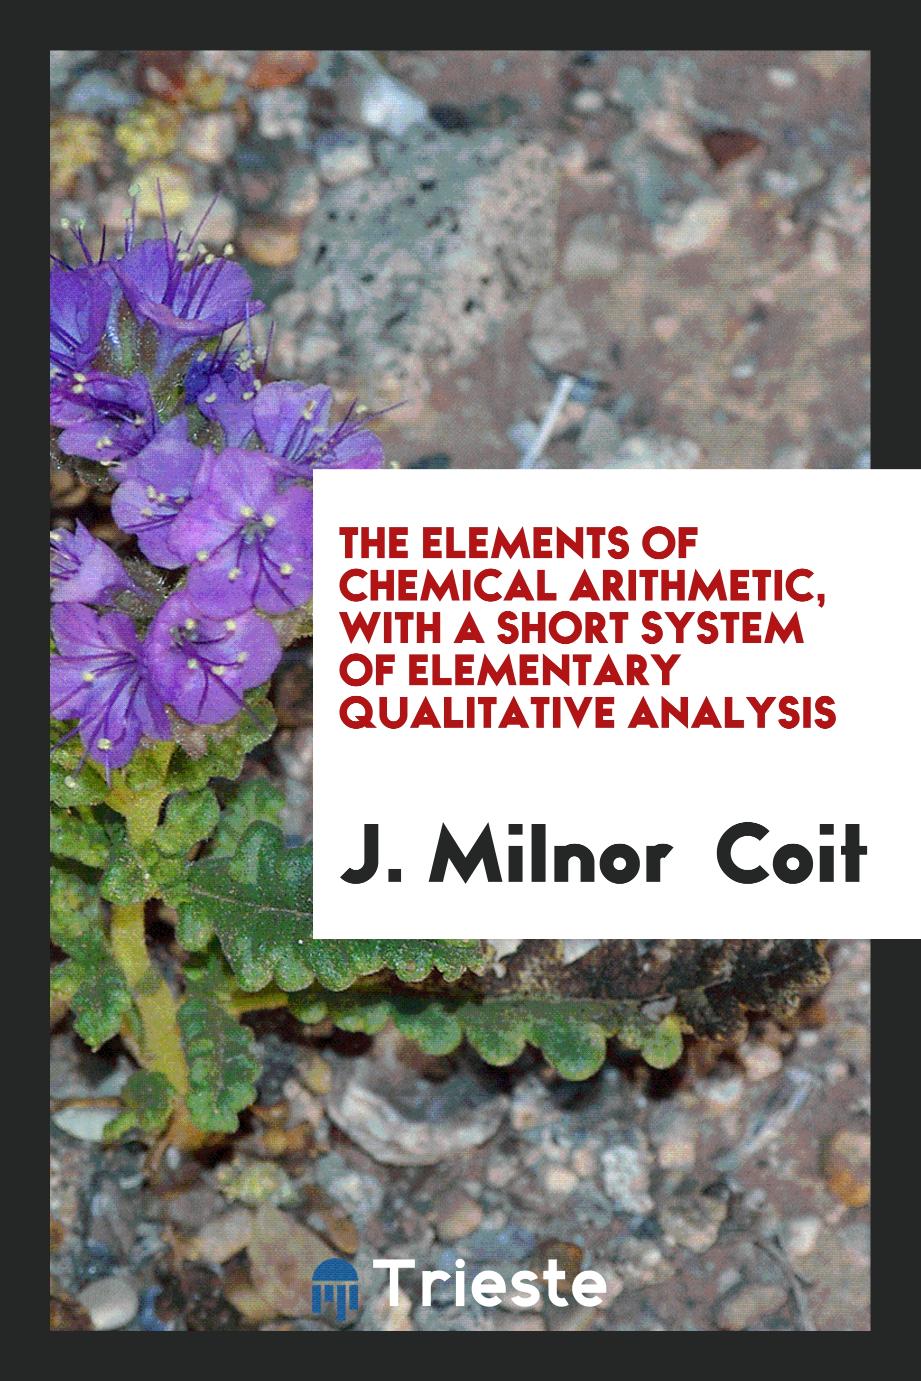 The Elements of Chemical Arithmetic, with a Short System of Elementary Qualitative Analysis